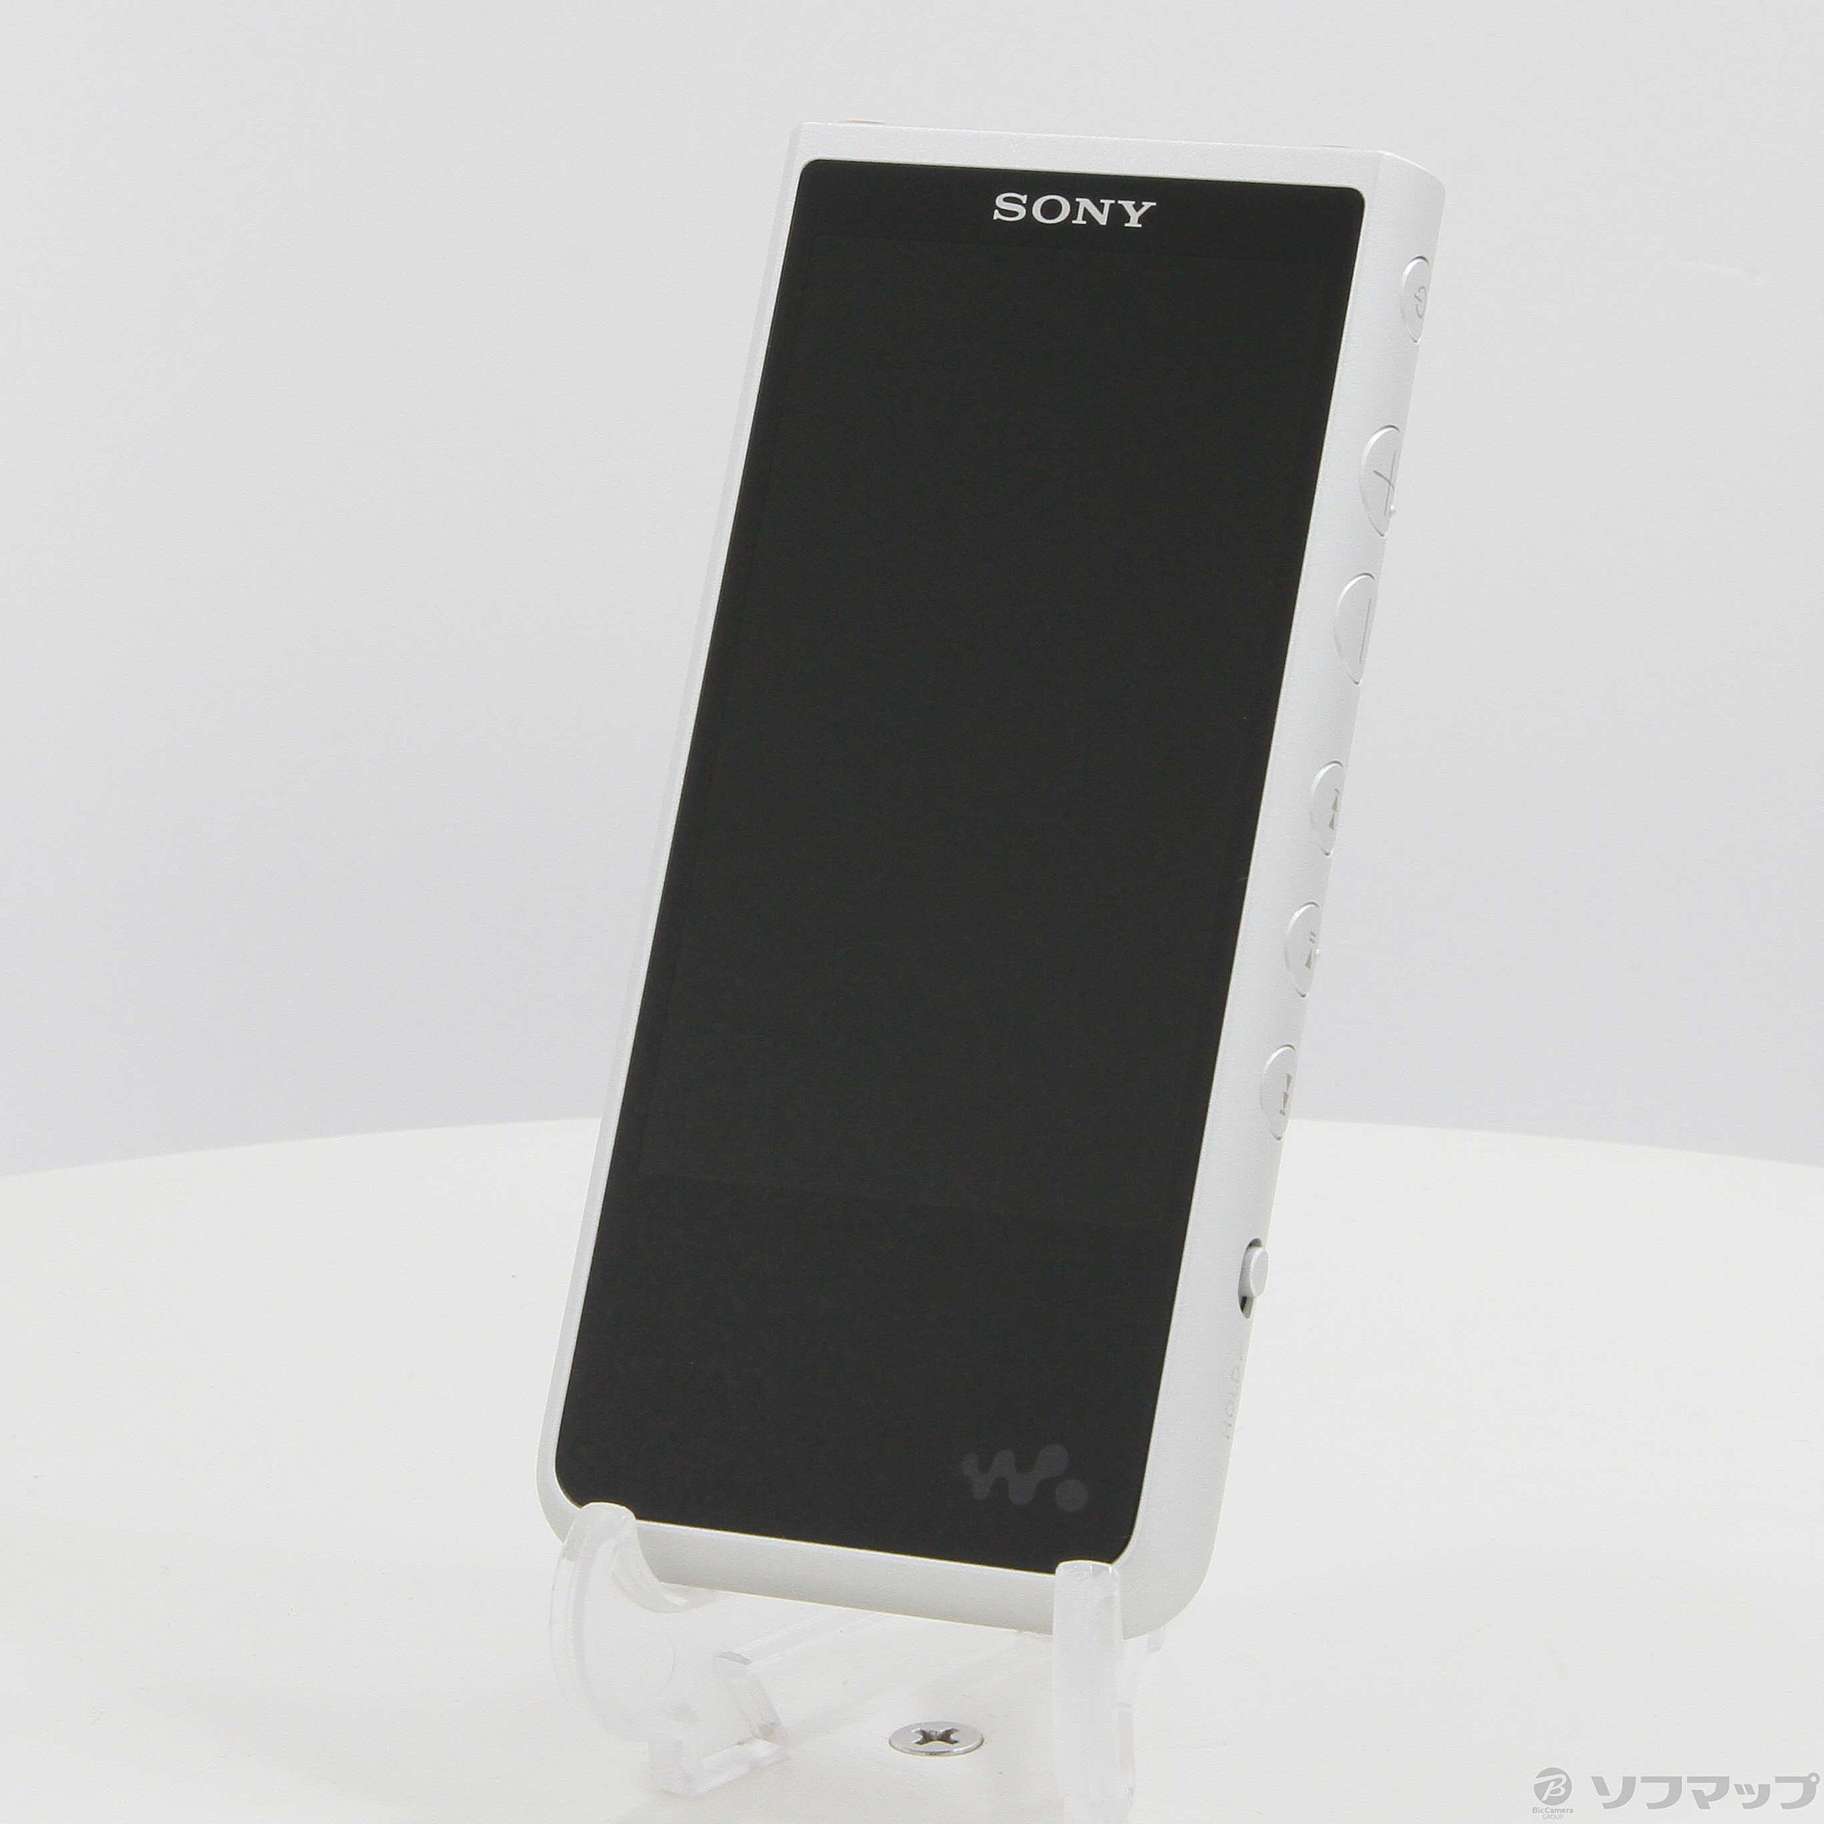 SONY ウォークマンZX500 NW-ZX507 S シルバー 64GB